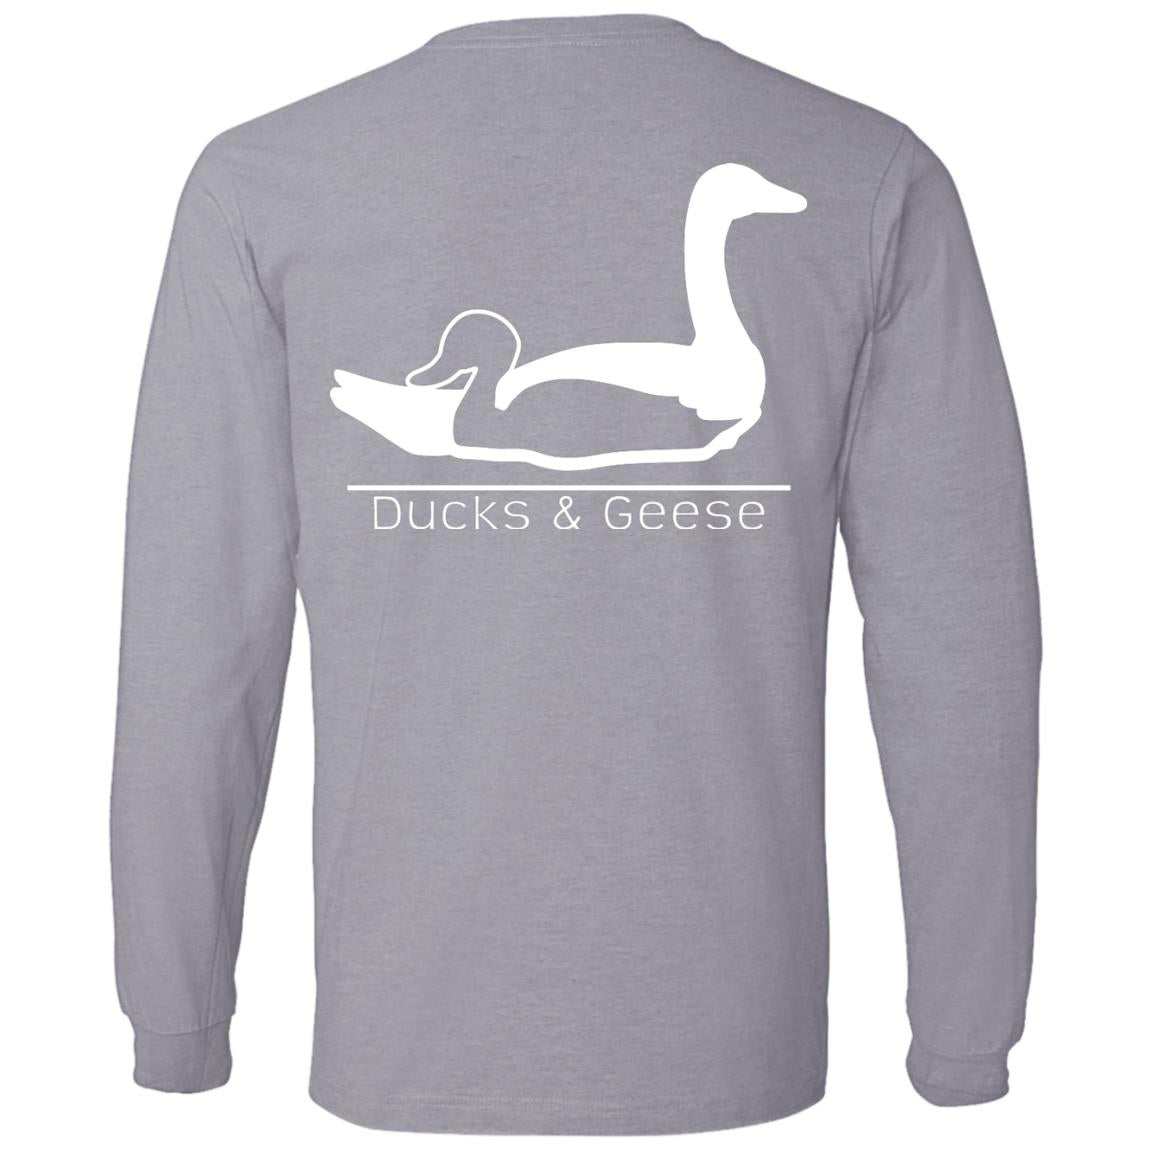 Ducks and Geese LS shirt